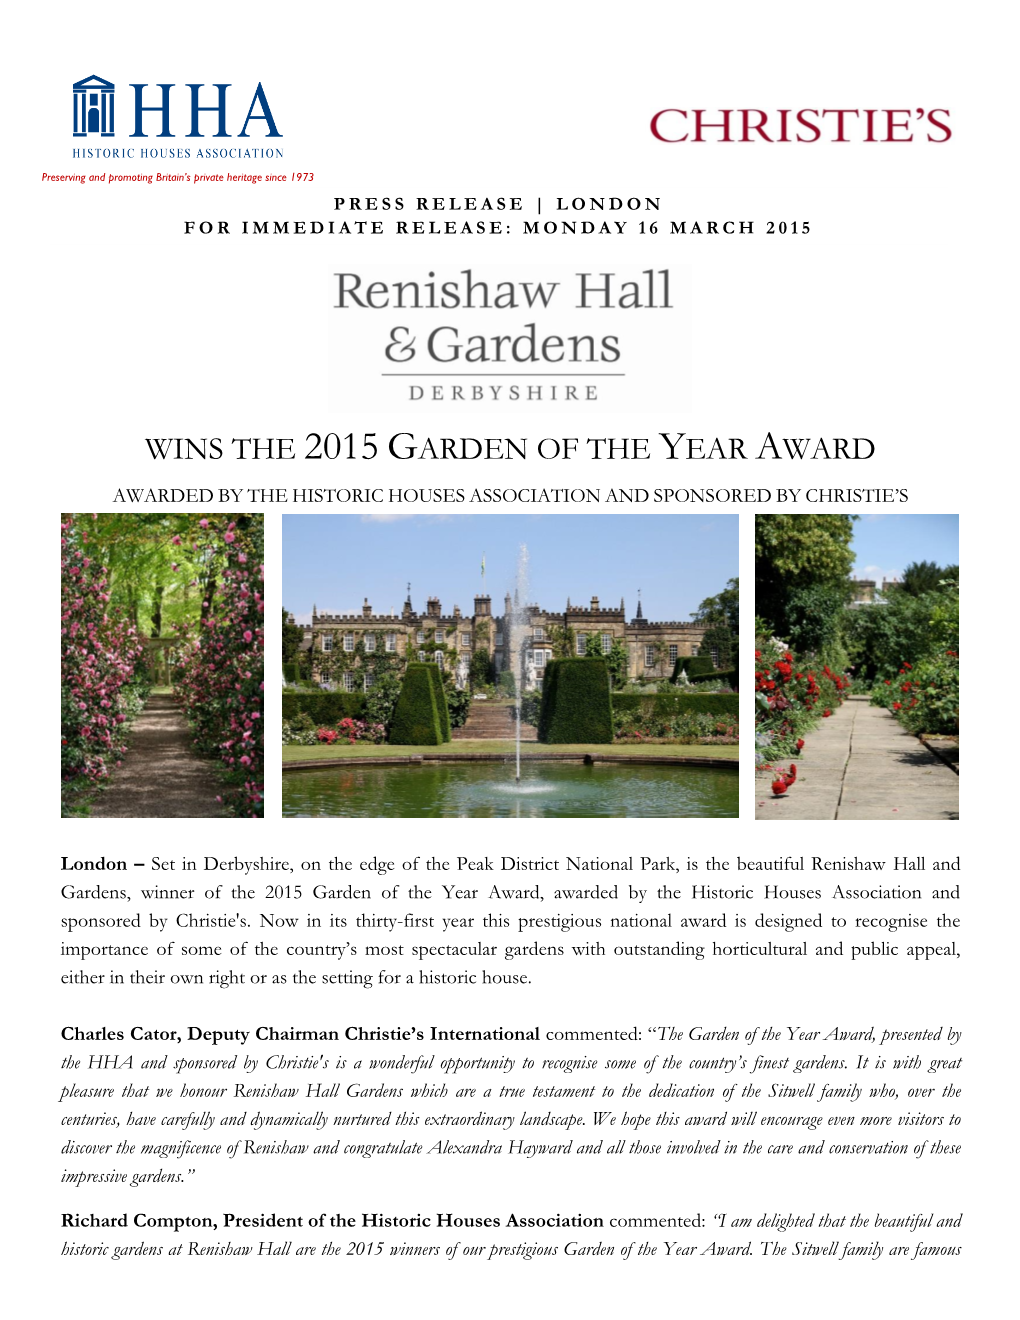 Wins the 2015 Garden of the Year Award